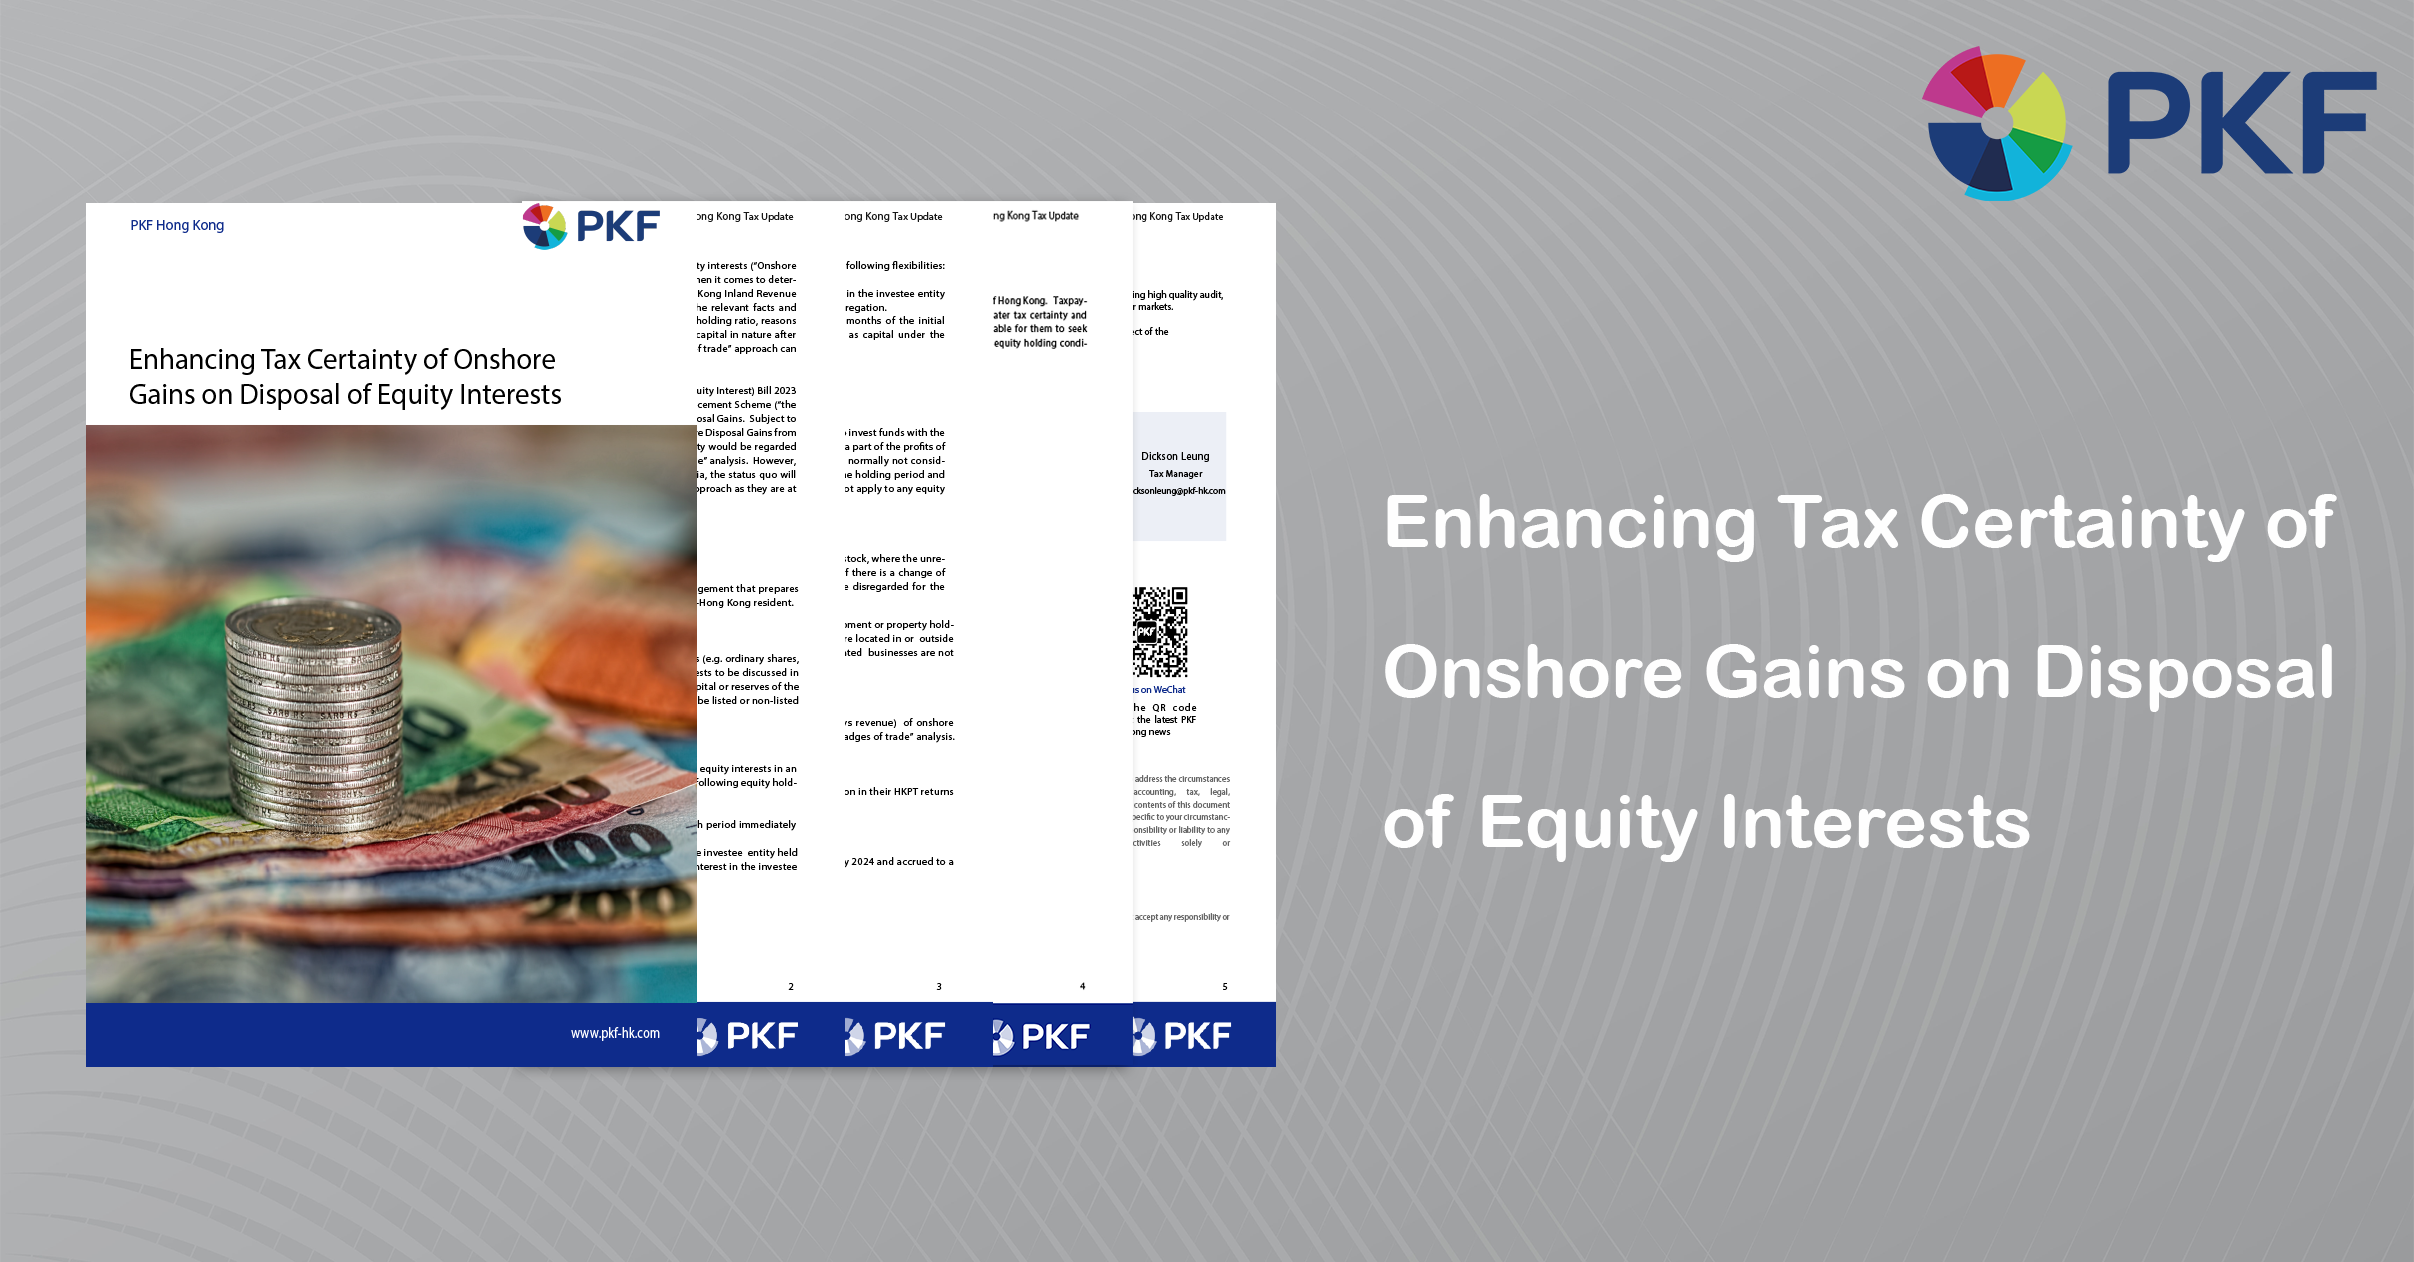 Enhancing Tax Certainty of Onshore Gains on Disposal of Equity Interests 